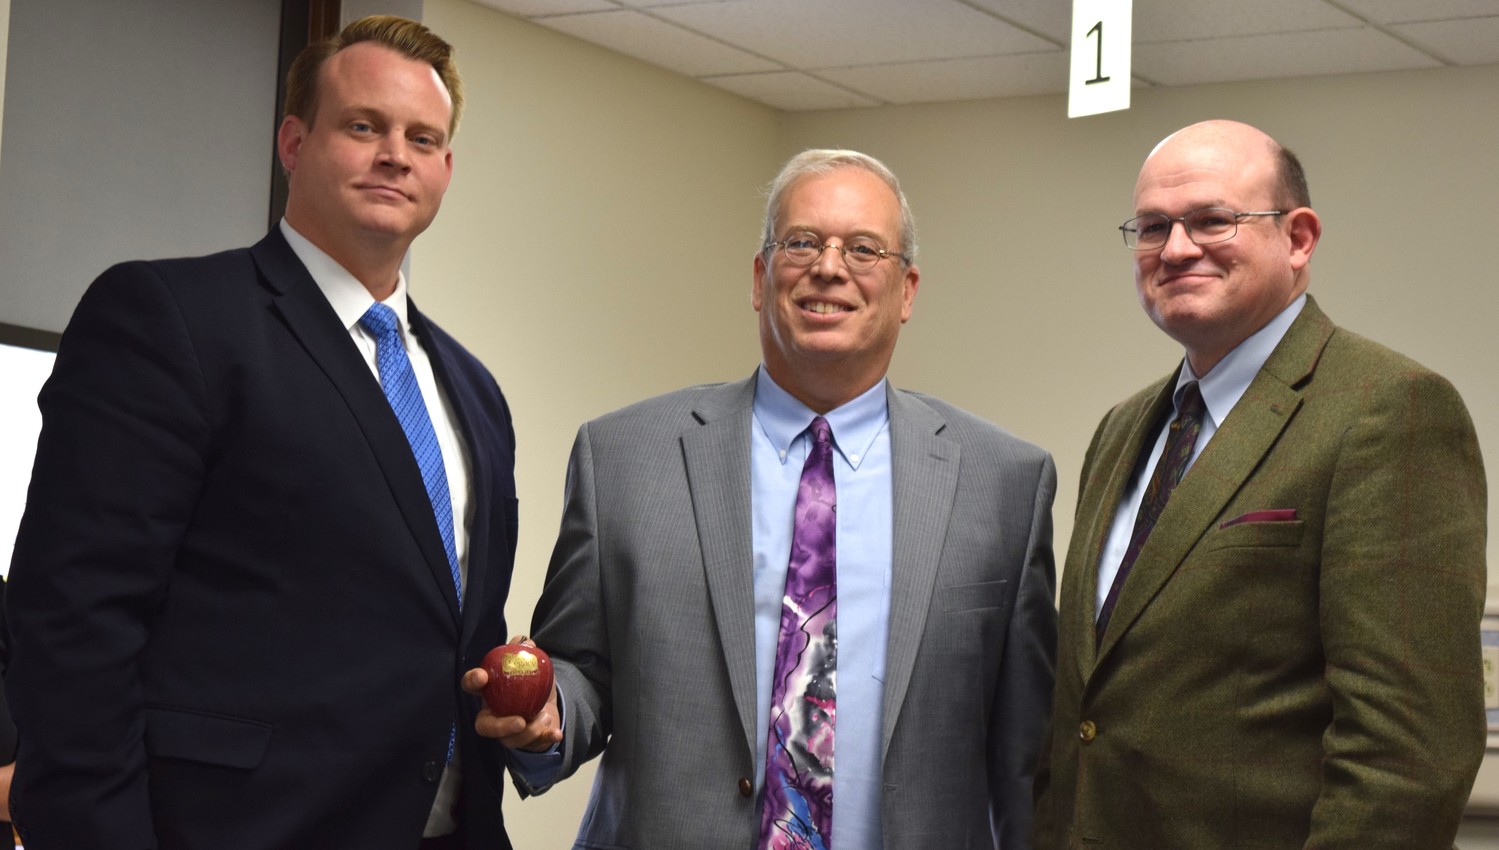 Skaggs Foundation grant committee member Matt Trokey, center, awards a ceremonial apple representing grant funding to Ozarks Technical Community College Table Rock Dean Robert Griffith, left, and Chancellor Hal Higdon.